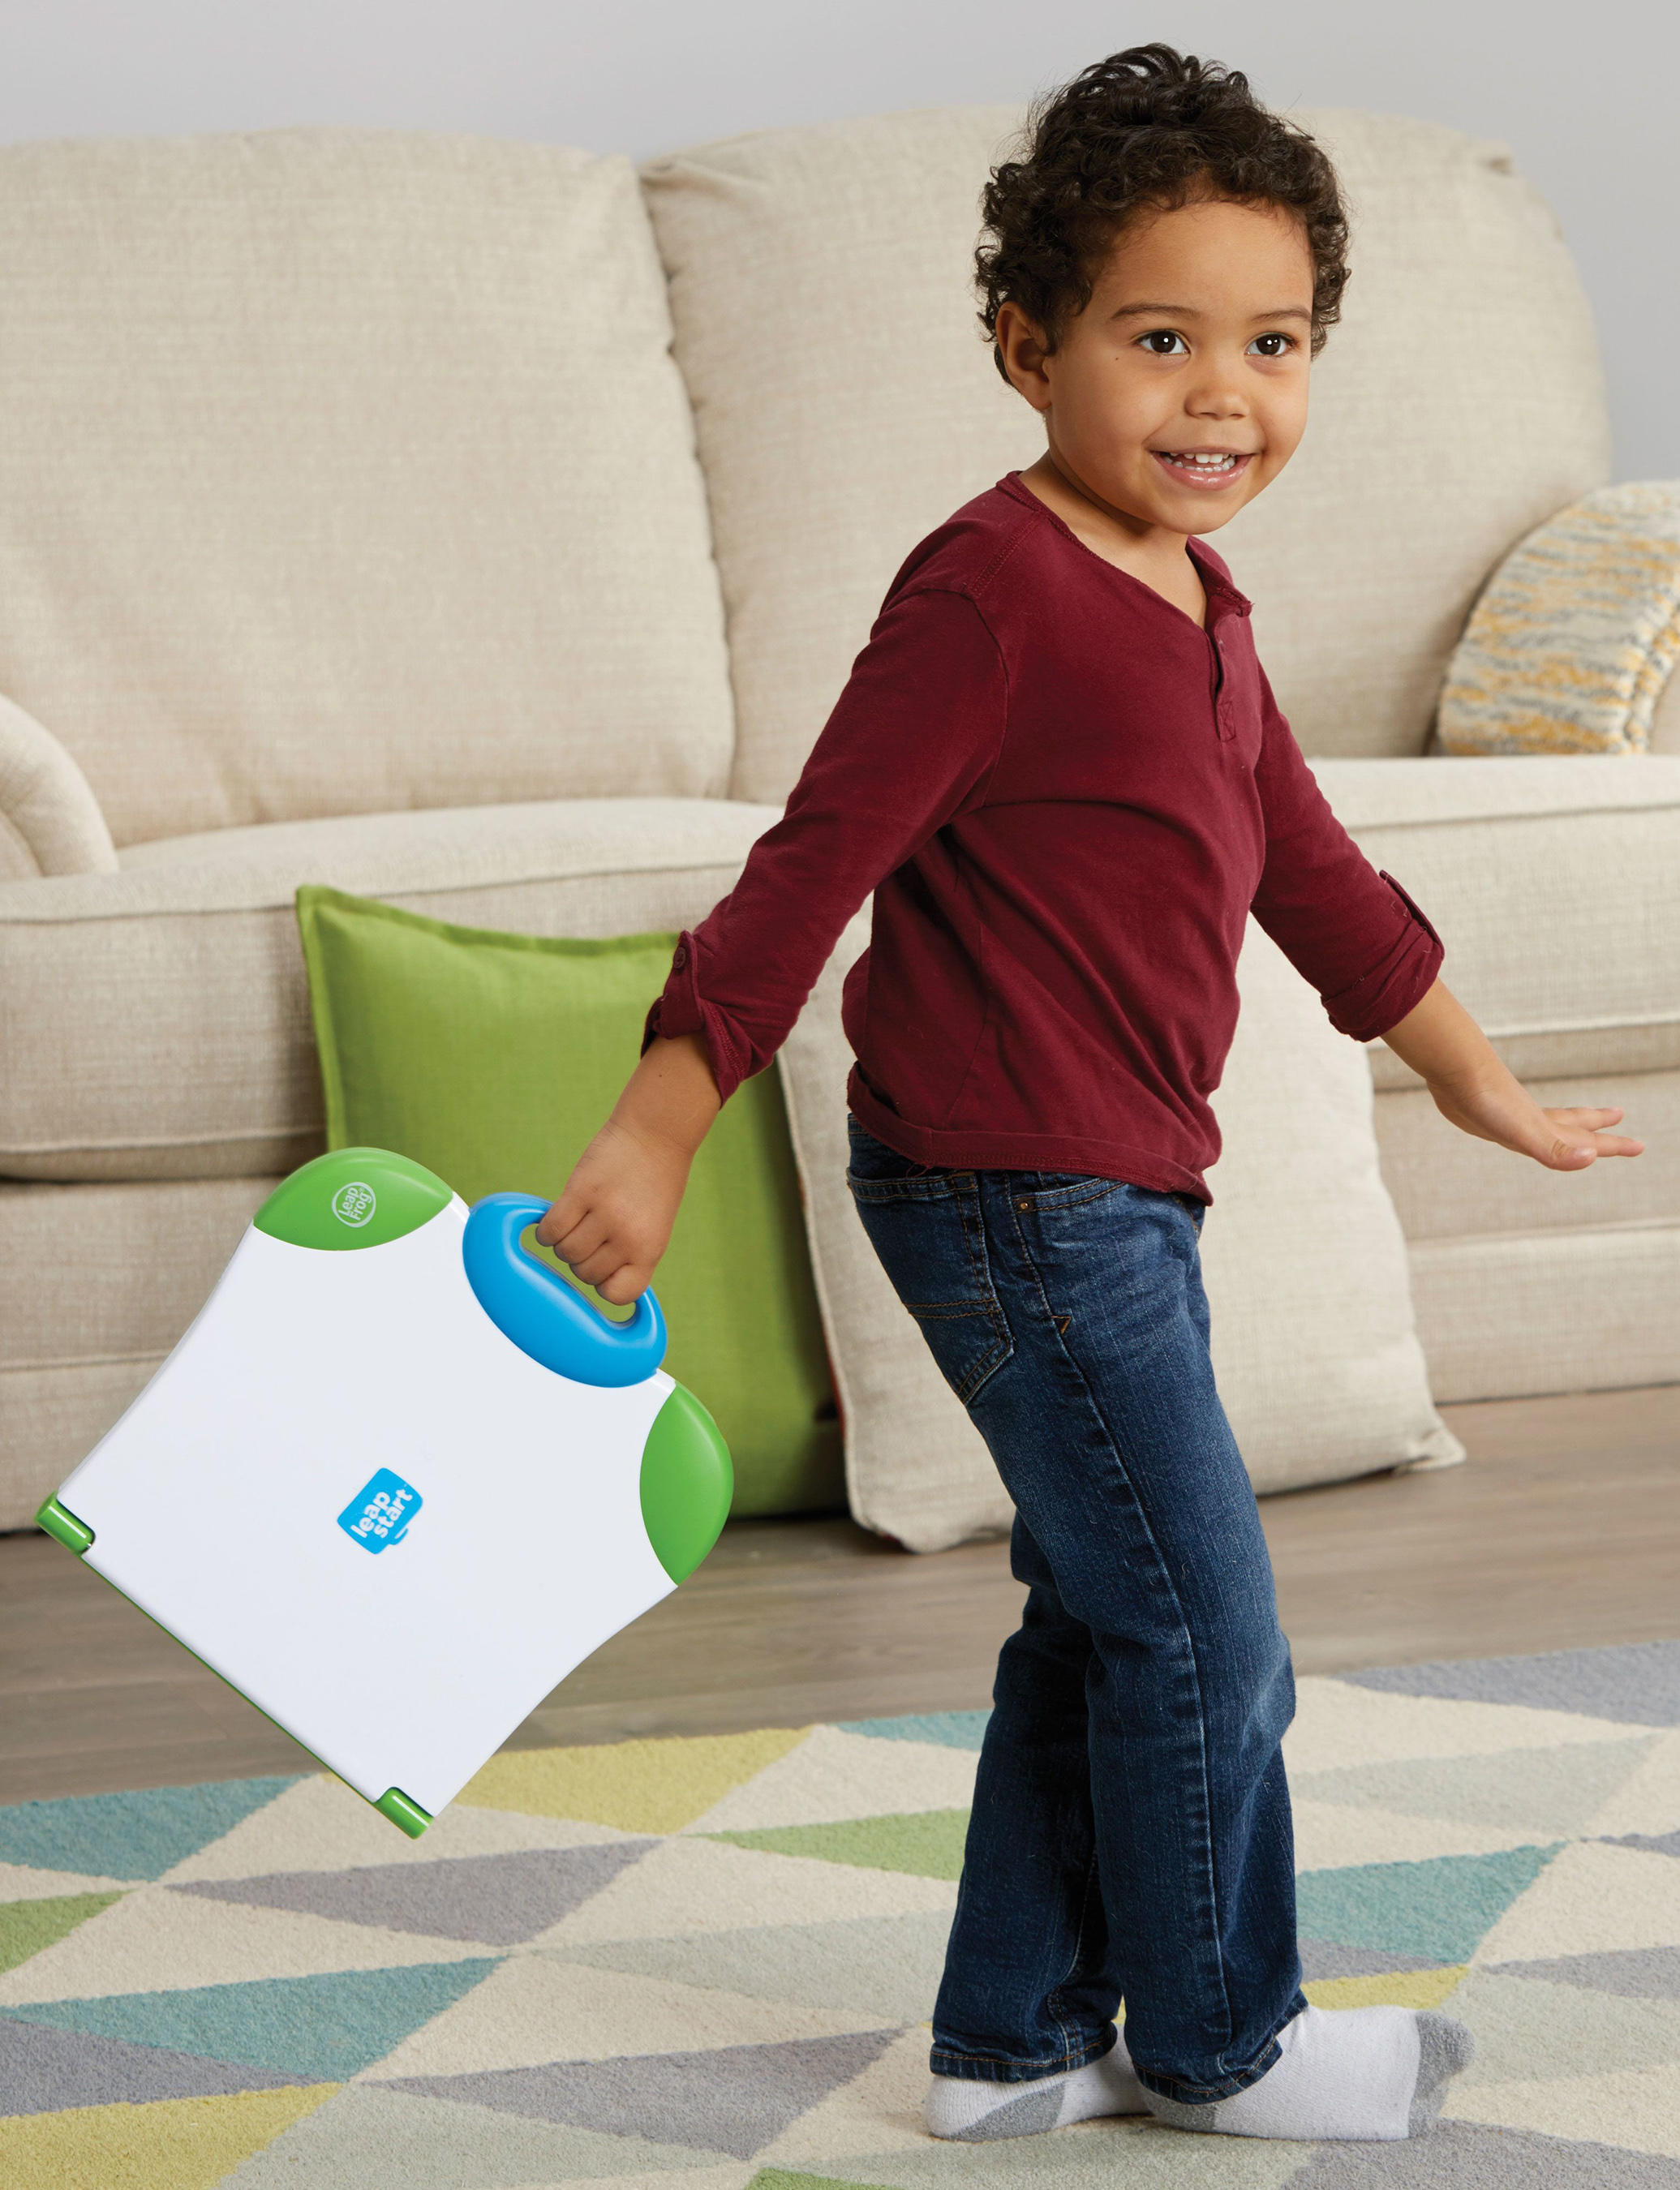 LeapFrog® introduces new engaging content for LeapStart™ Learning System, available now.